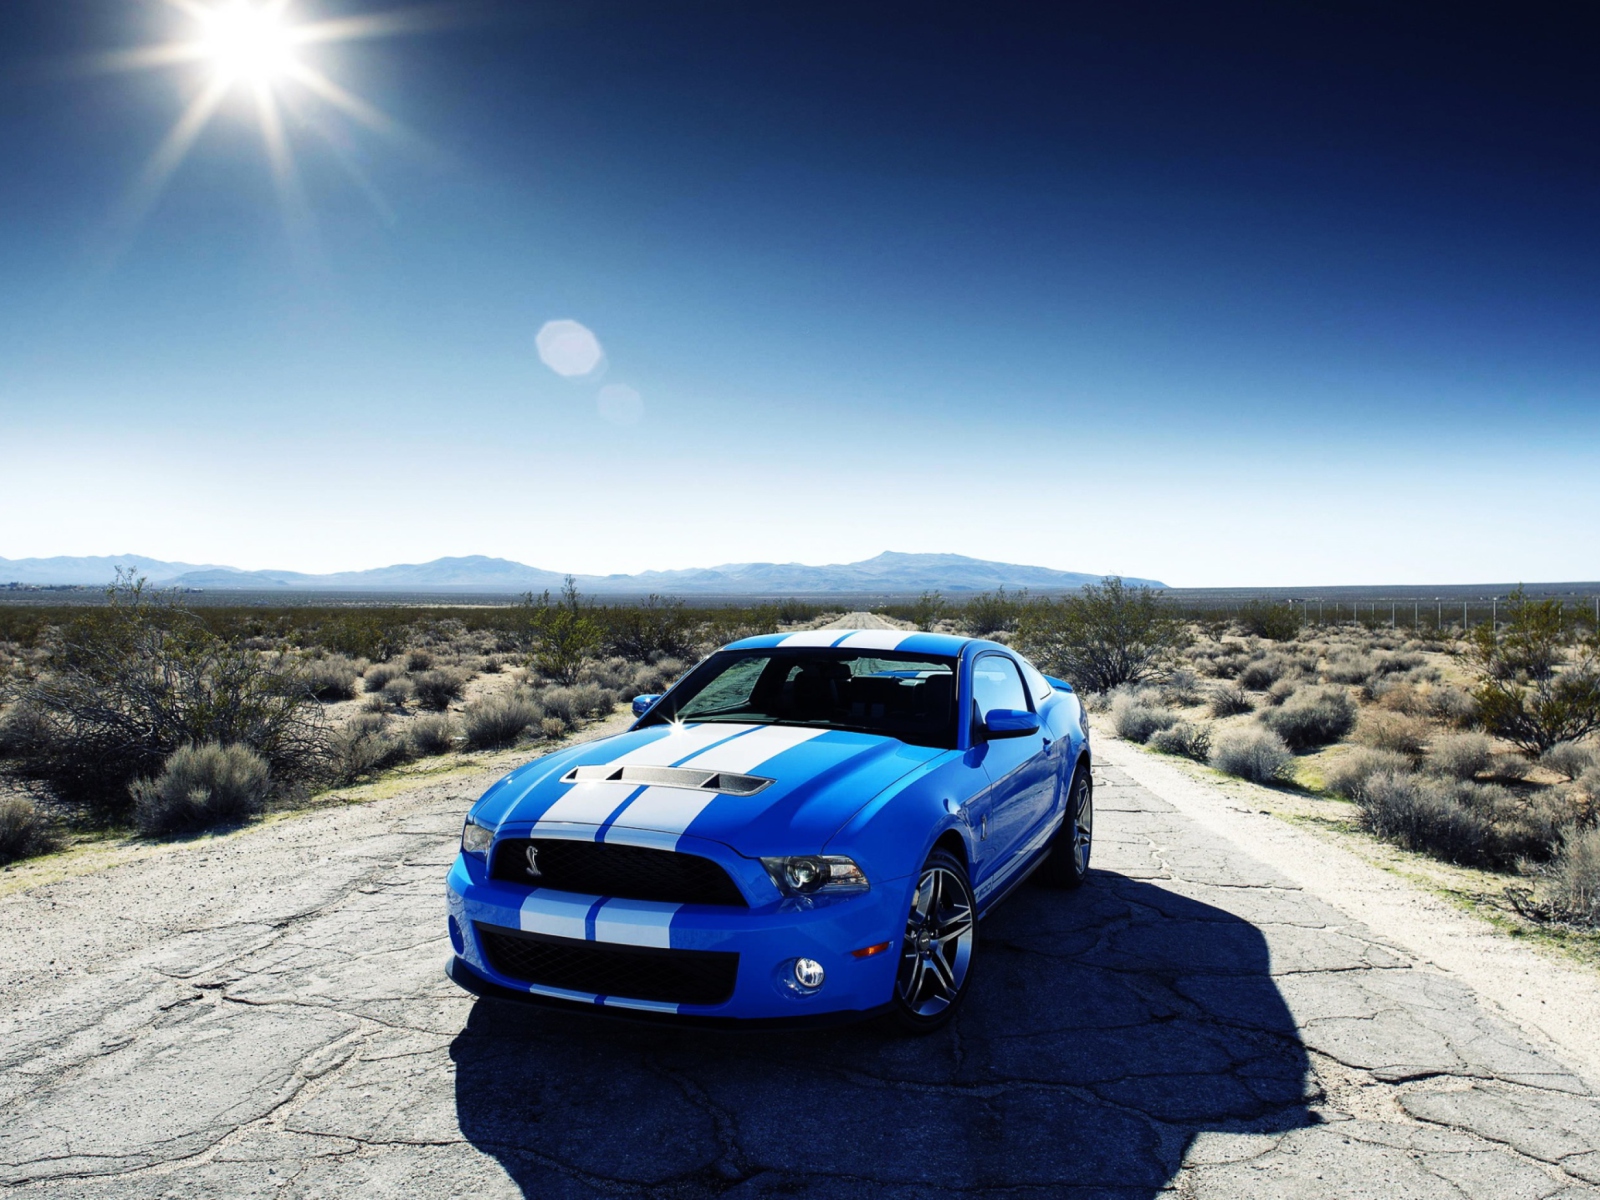 Das Ford Shelby Gt500 Wallpaper 1600x1200